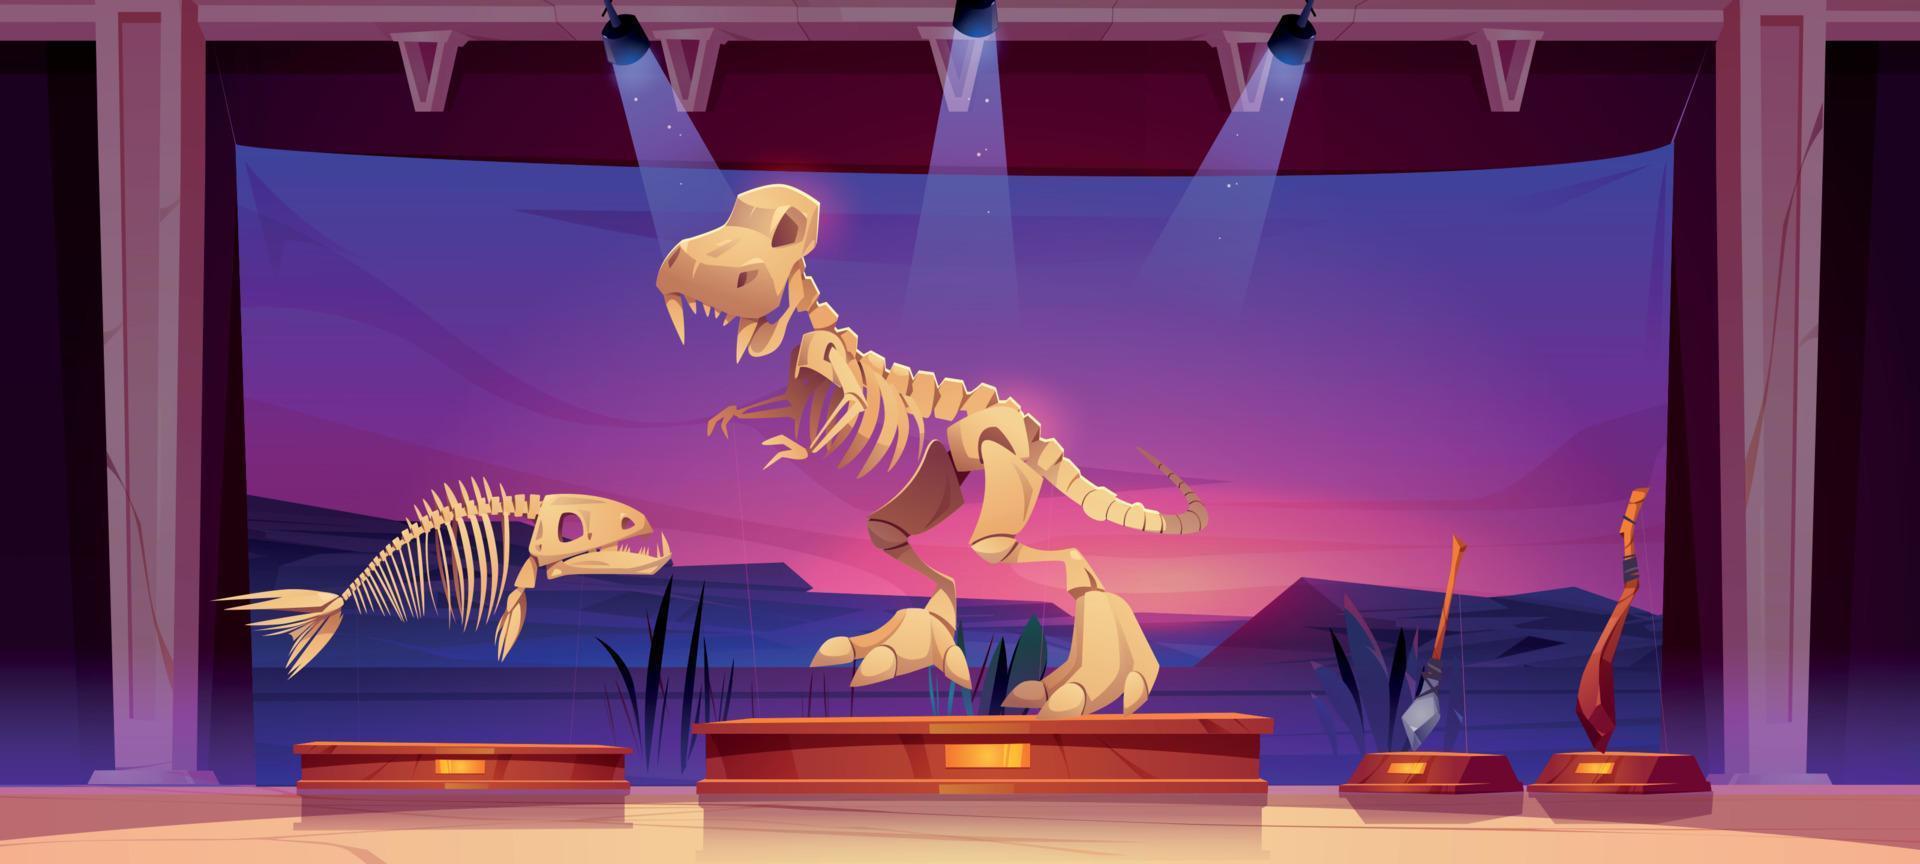 Historical museum with fossil dinosaur skeleton vector